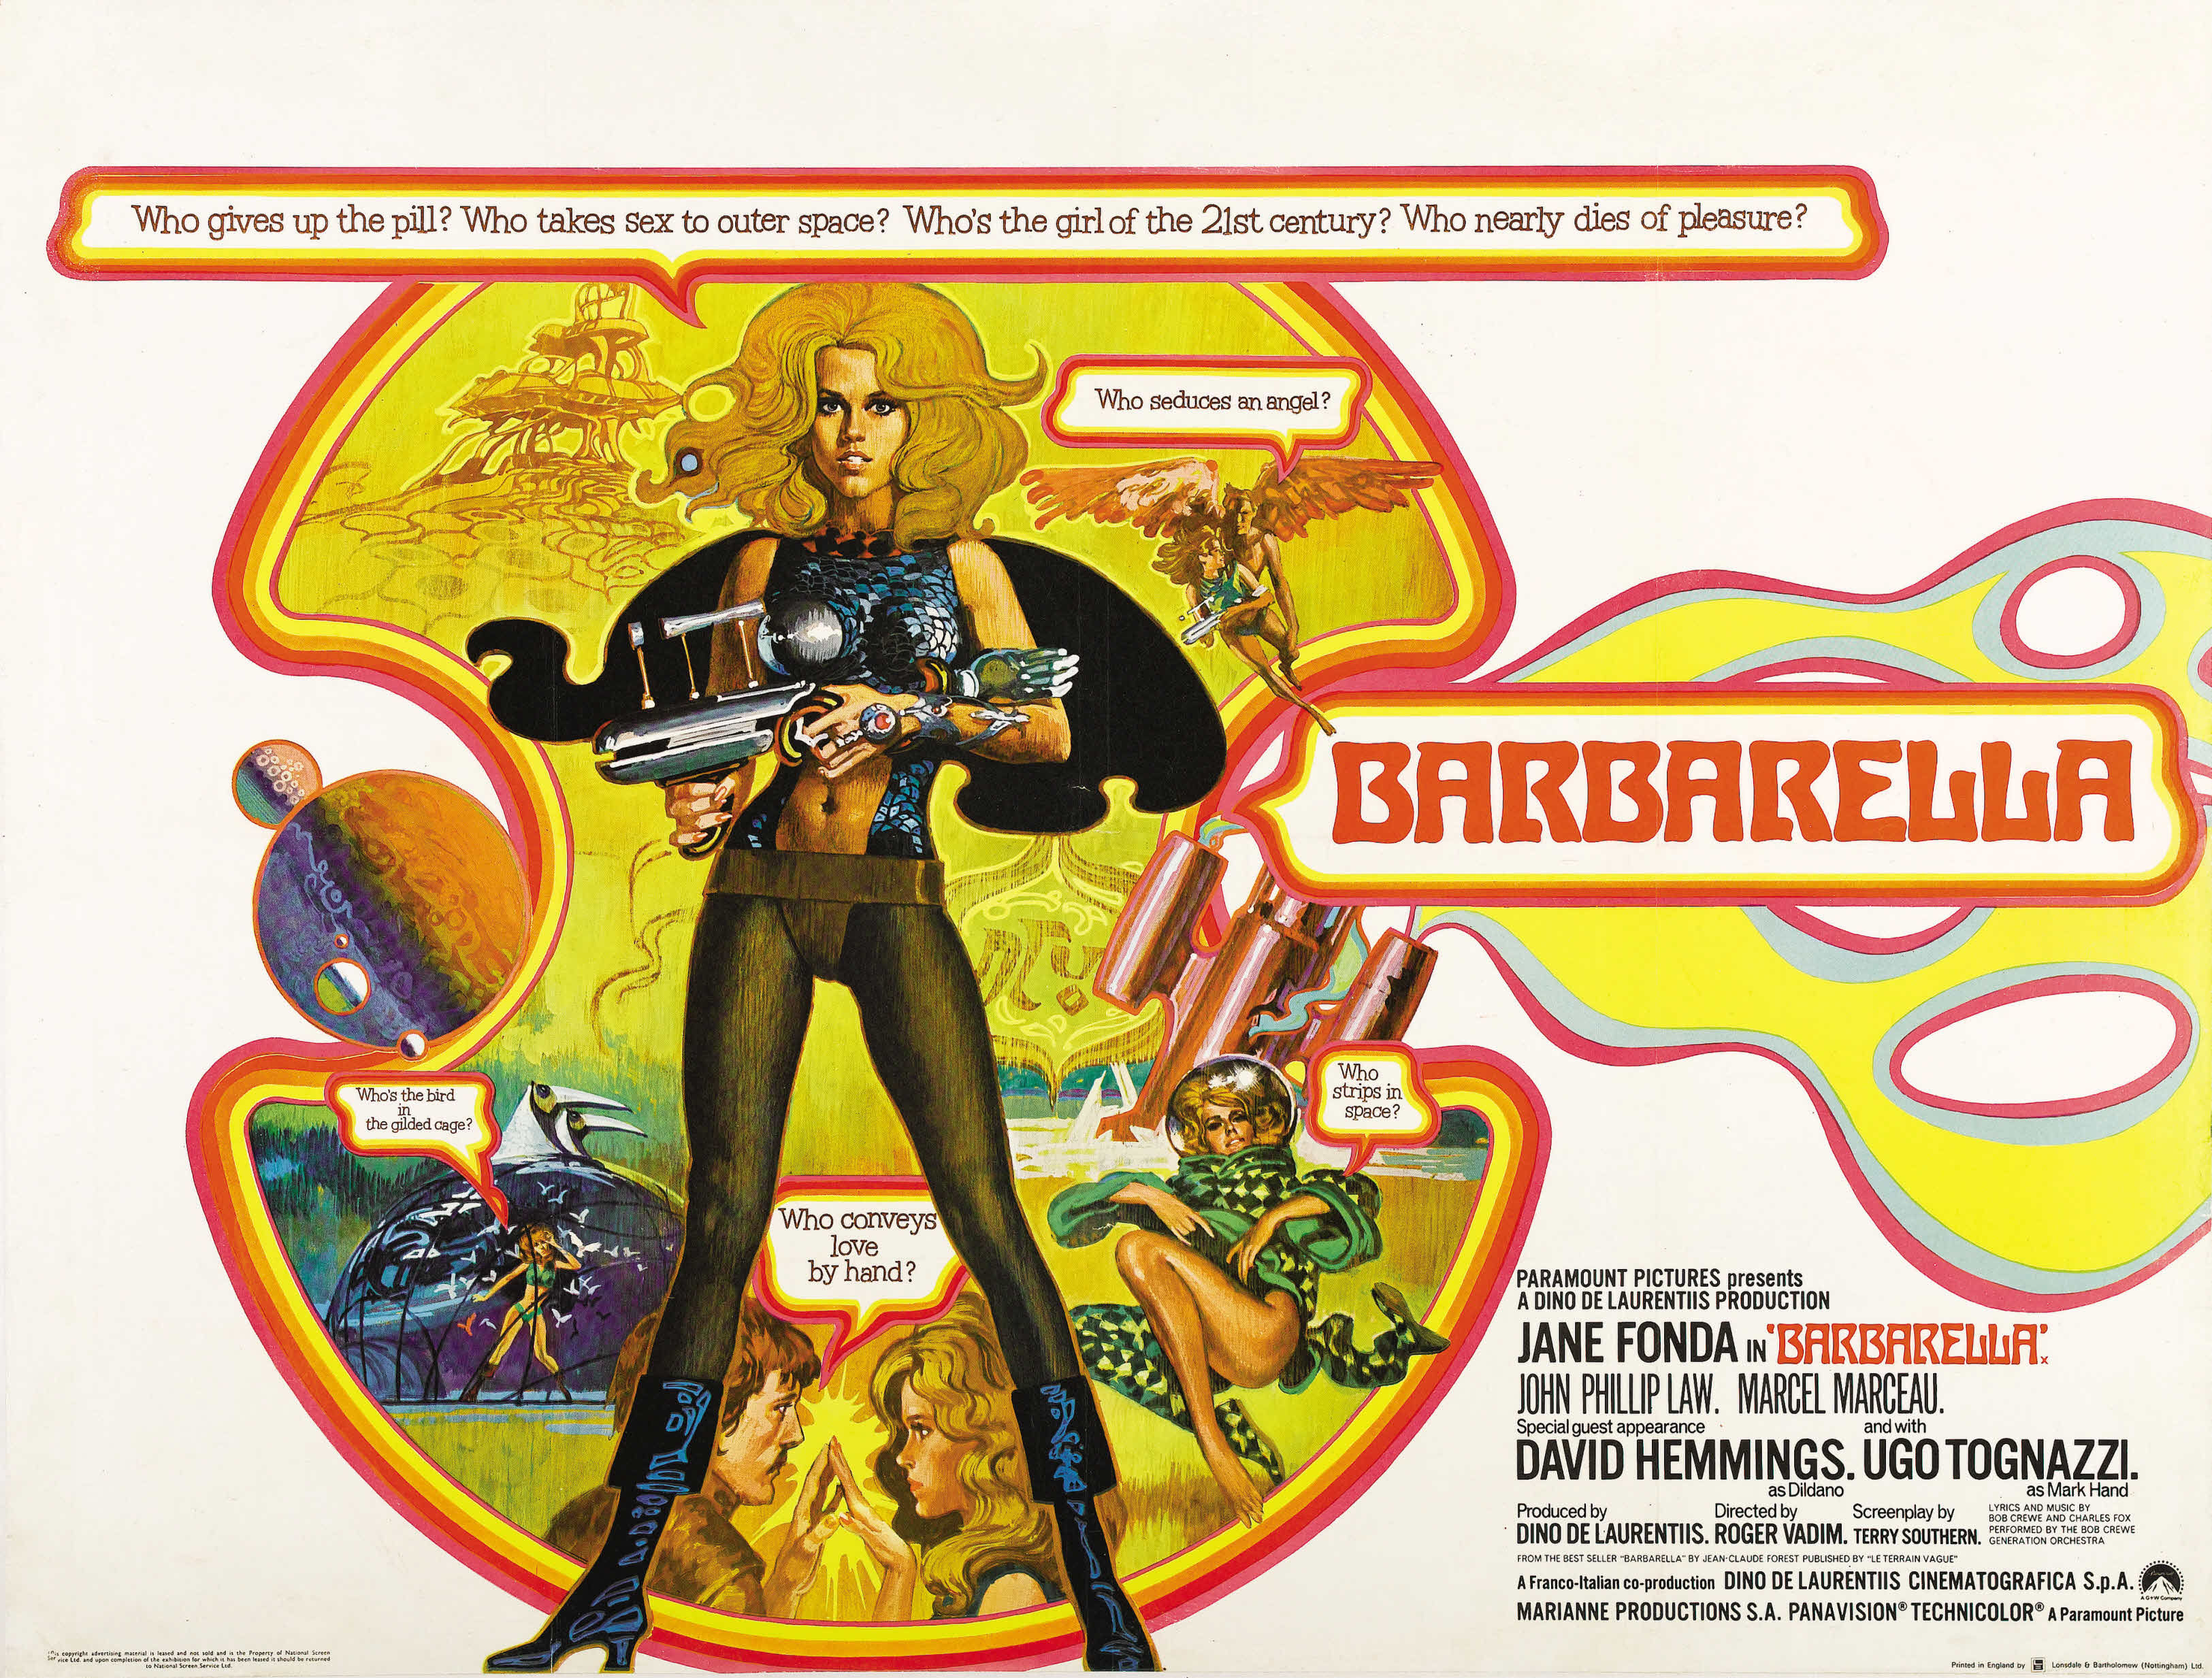 barbarella poster - Who gives up the pill? Who takes sex to outer space? Who's the girl of the 21st century? Who nearly dies of plensure? Who do no? Barbarella Who conveys by hand Paruount Pic Adino Laurentiis Production C On Jane Fonda In Barbarella Ohn 